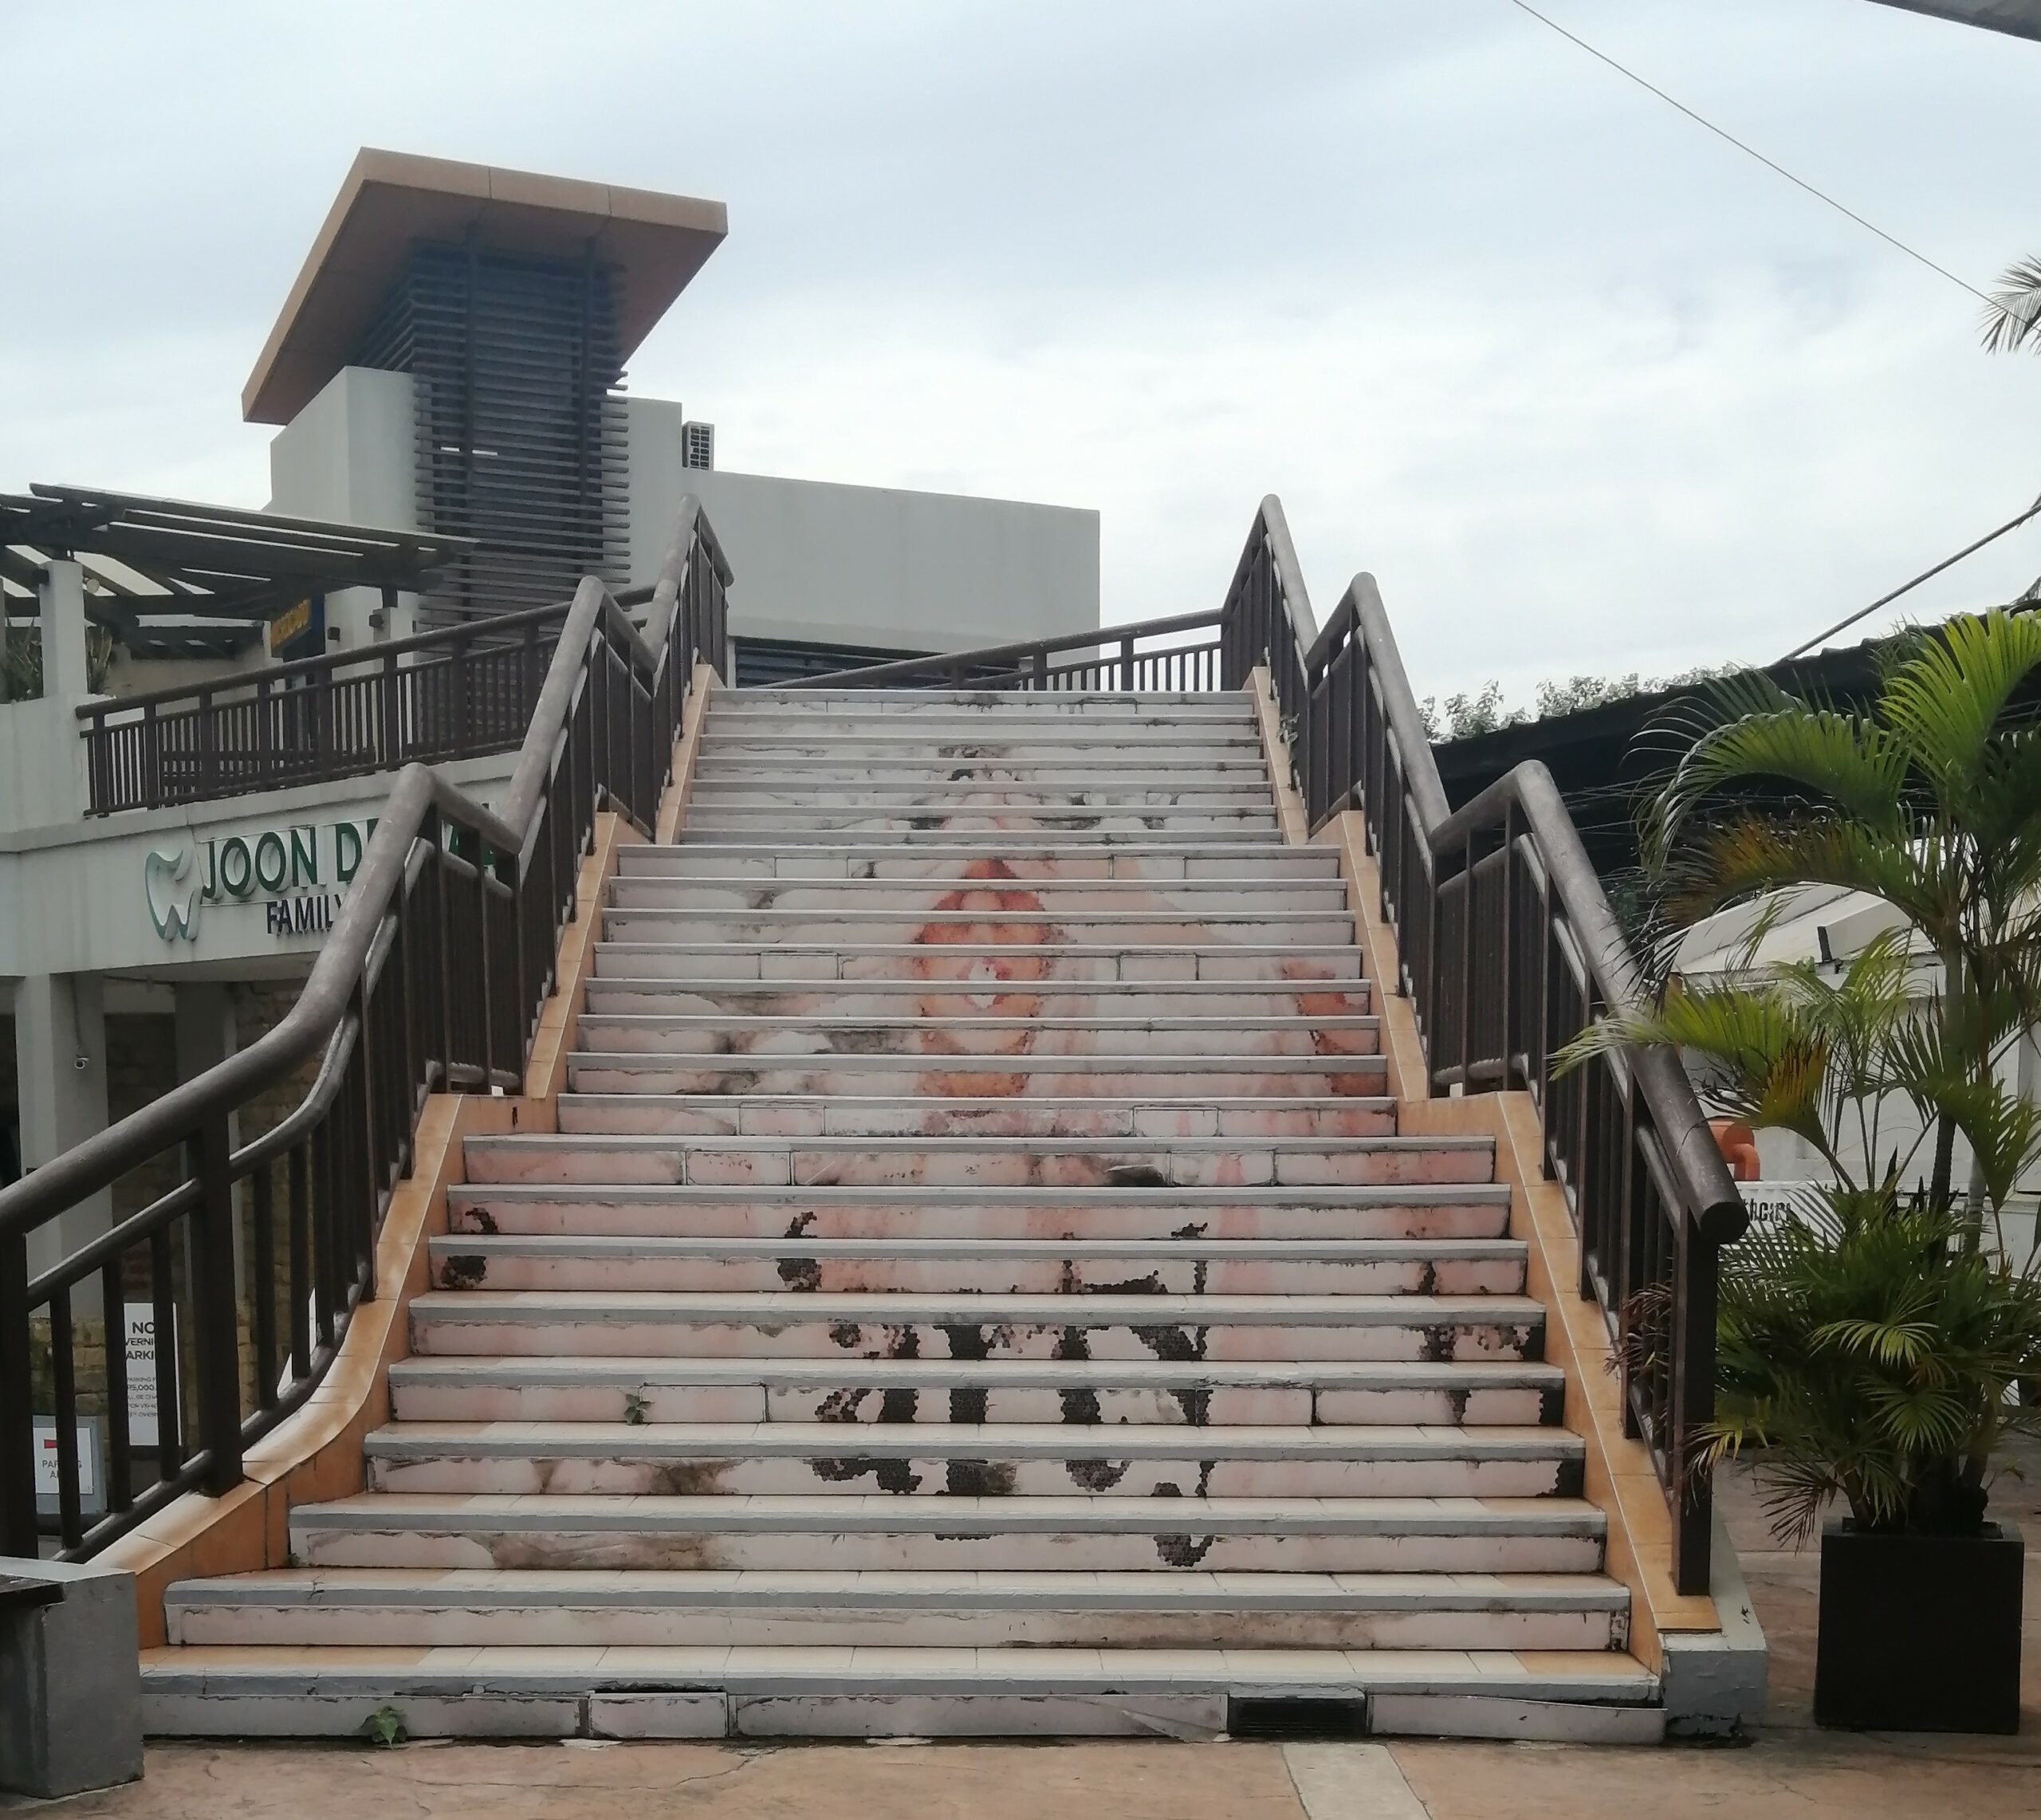 Stairway Art - The Persimmon Mabolo